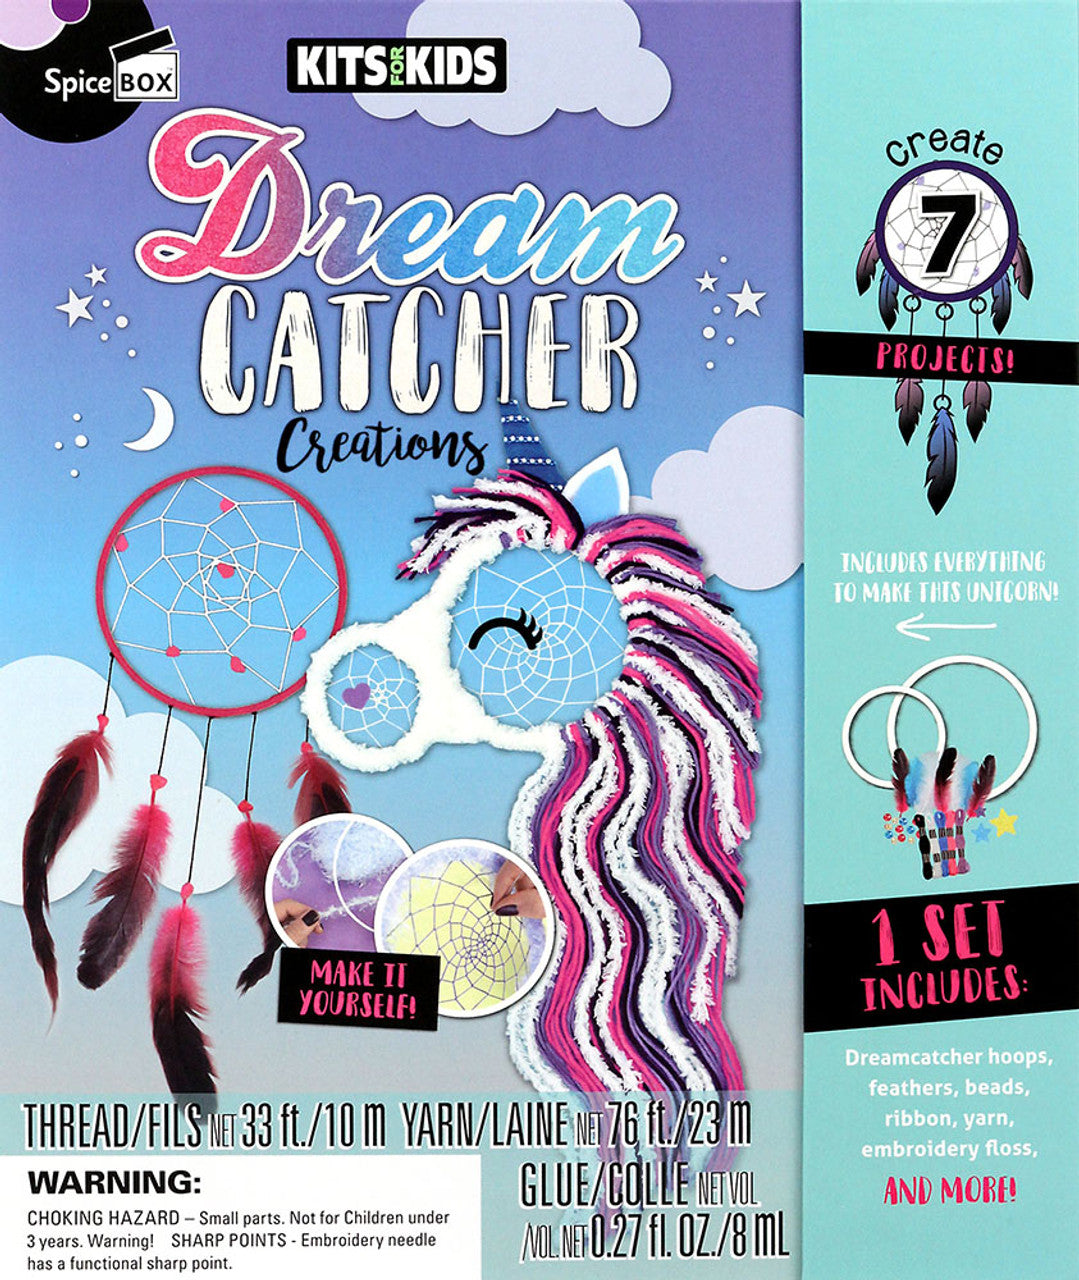 SpiceBox Kits for Kids Dreamcatcher Creations